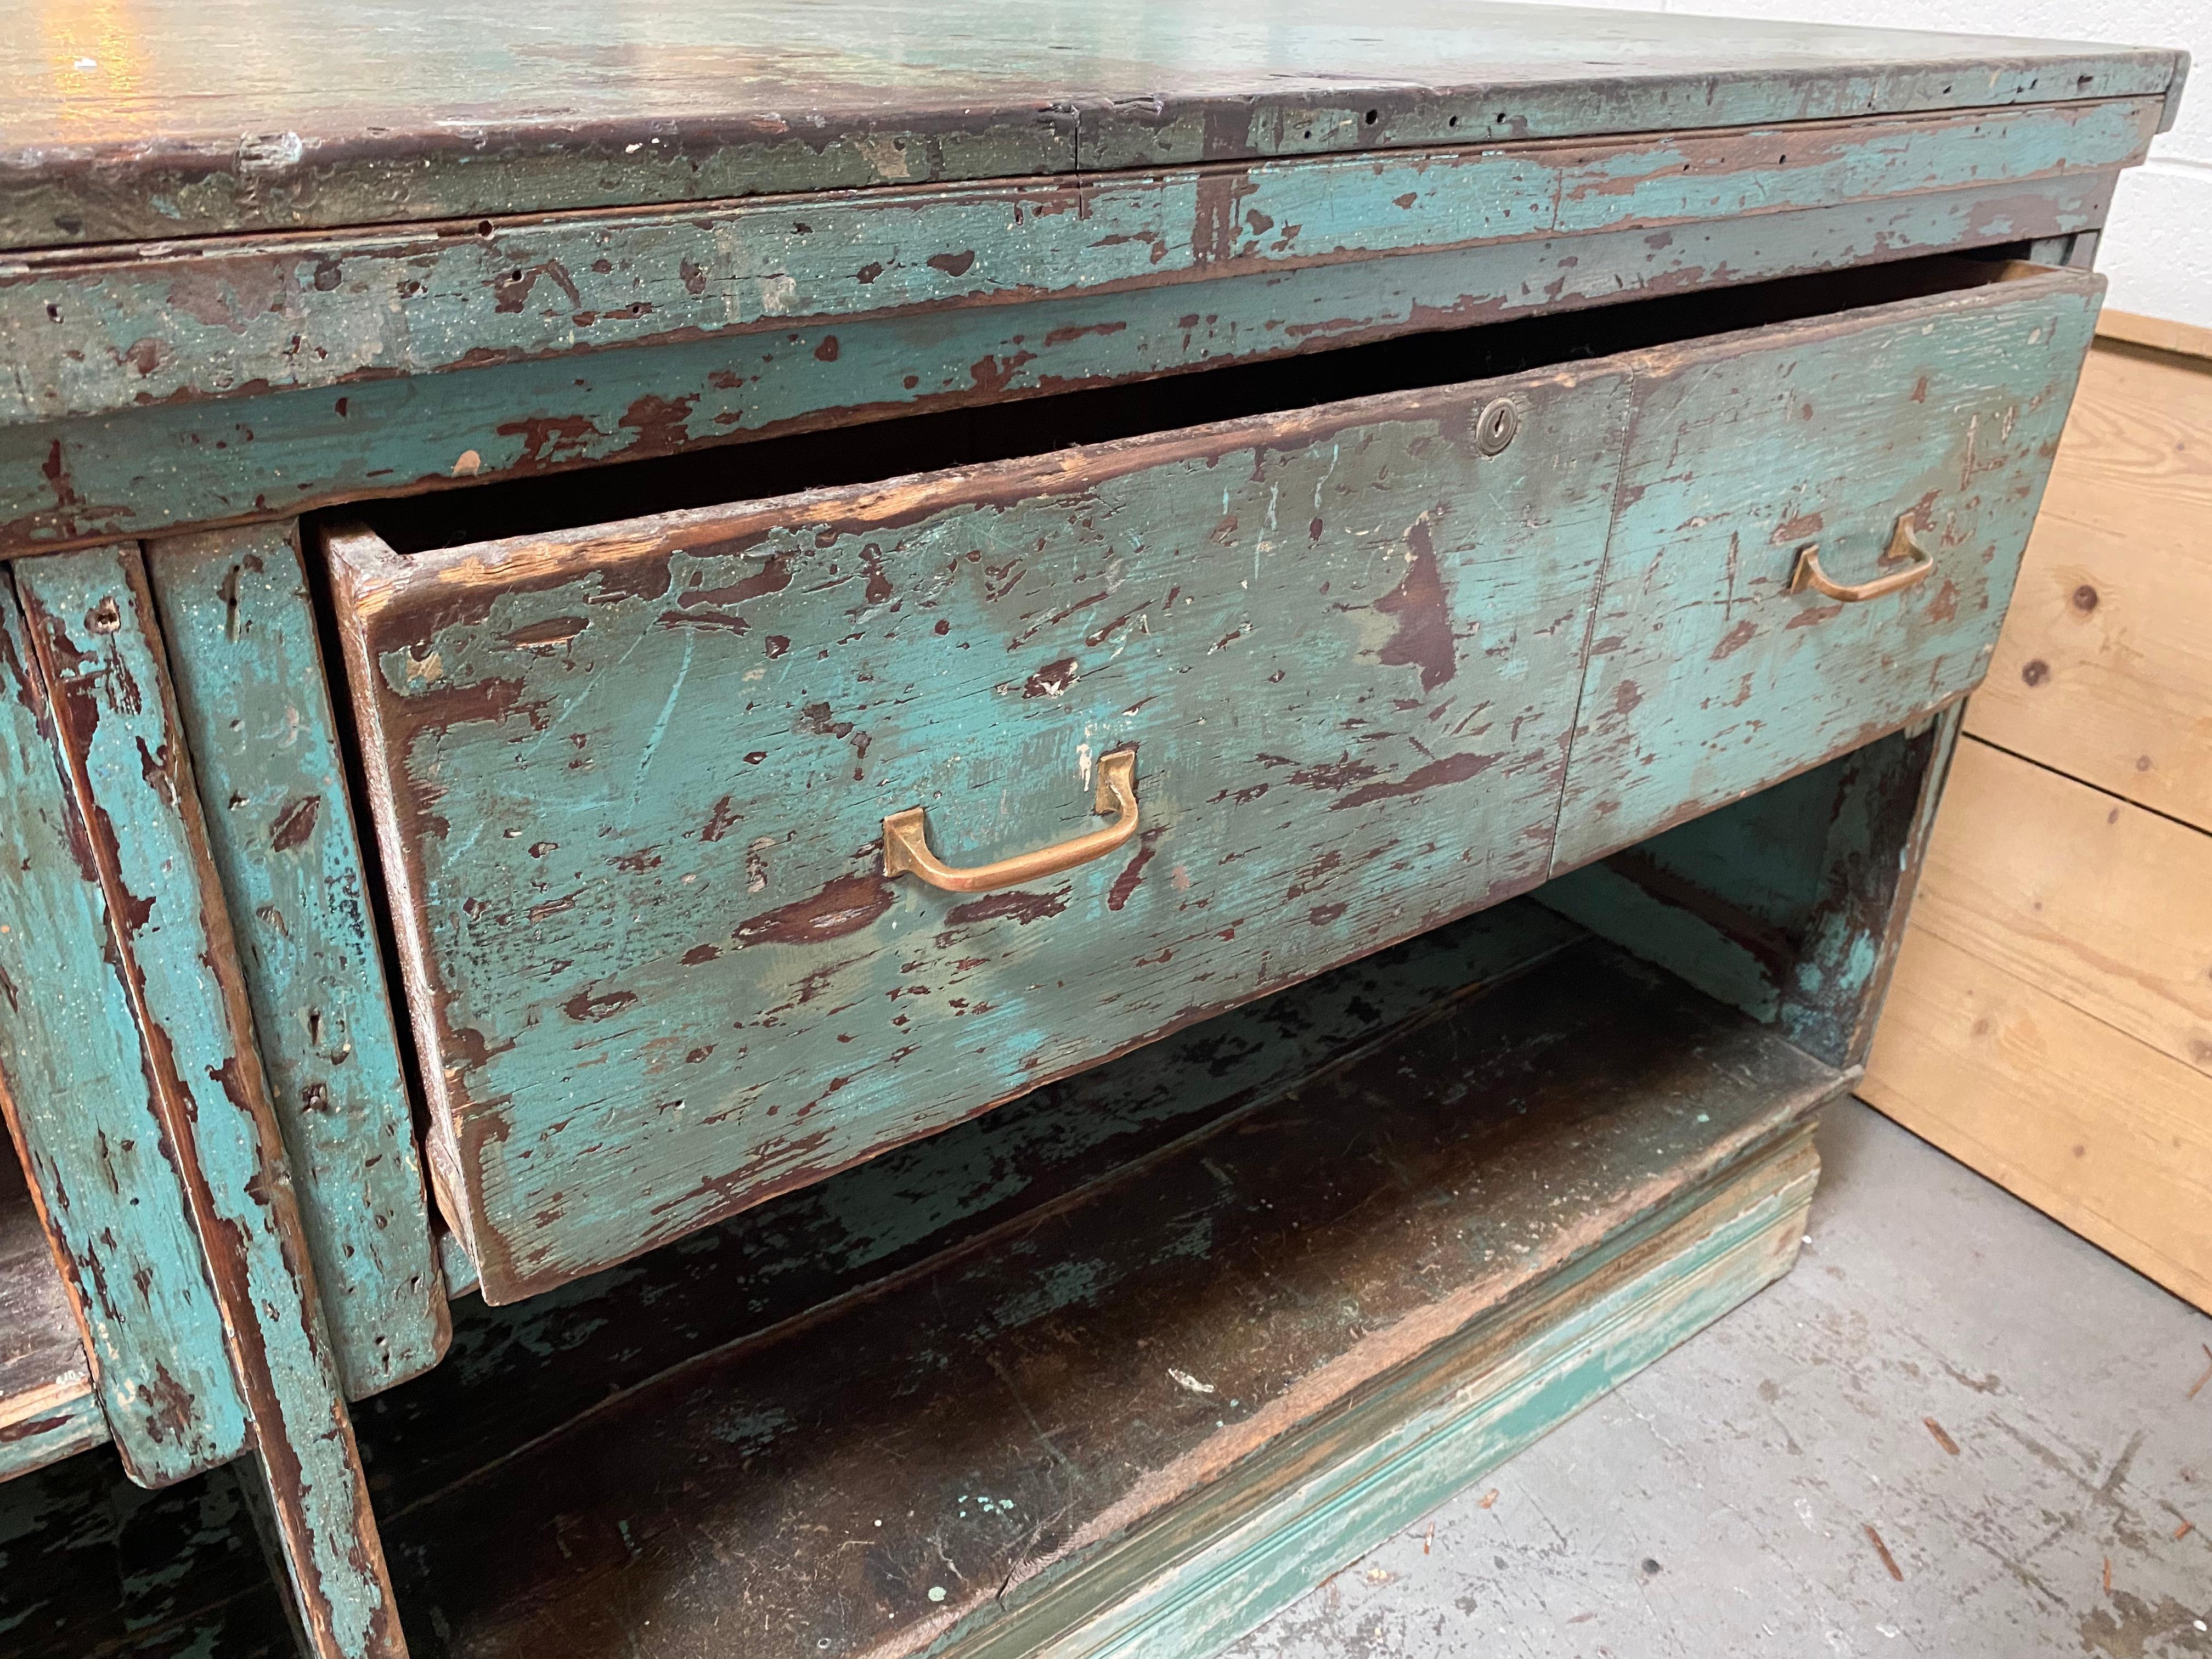 Vintage merchant’s shop counter in solid oak with storage and hammered tin details. This piece is massive and heavy! It would be an exceptional anchor for the right space as an island, countertop, or cash-wrap. Two hammered tin plates adorn the